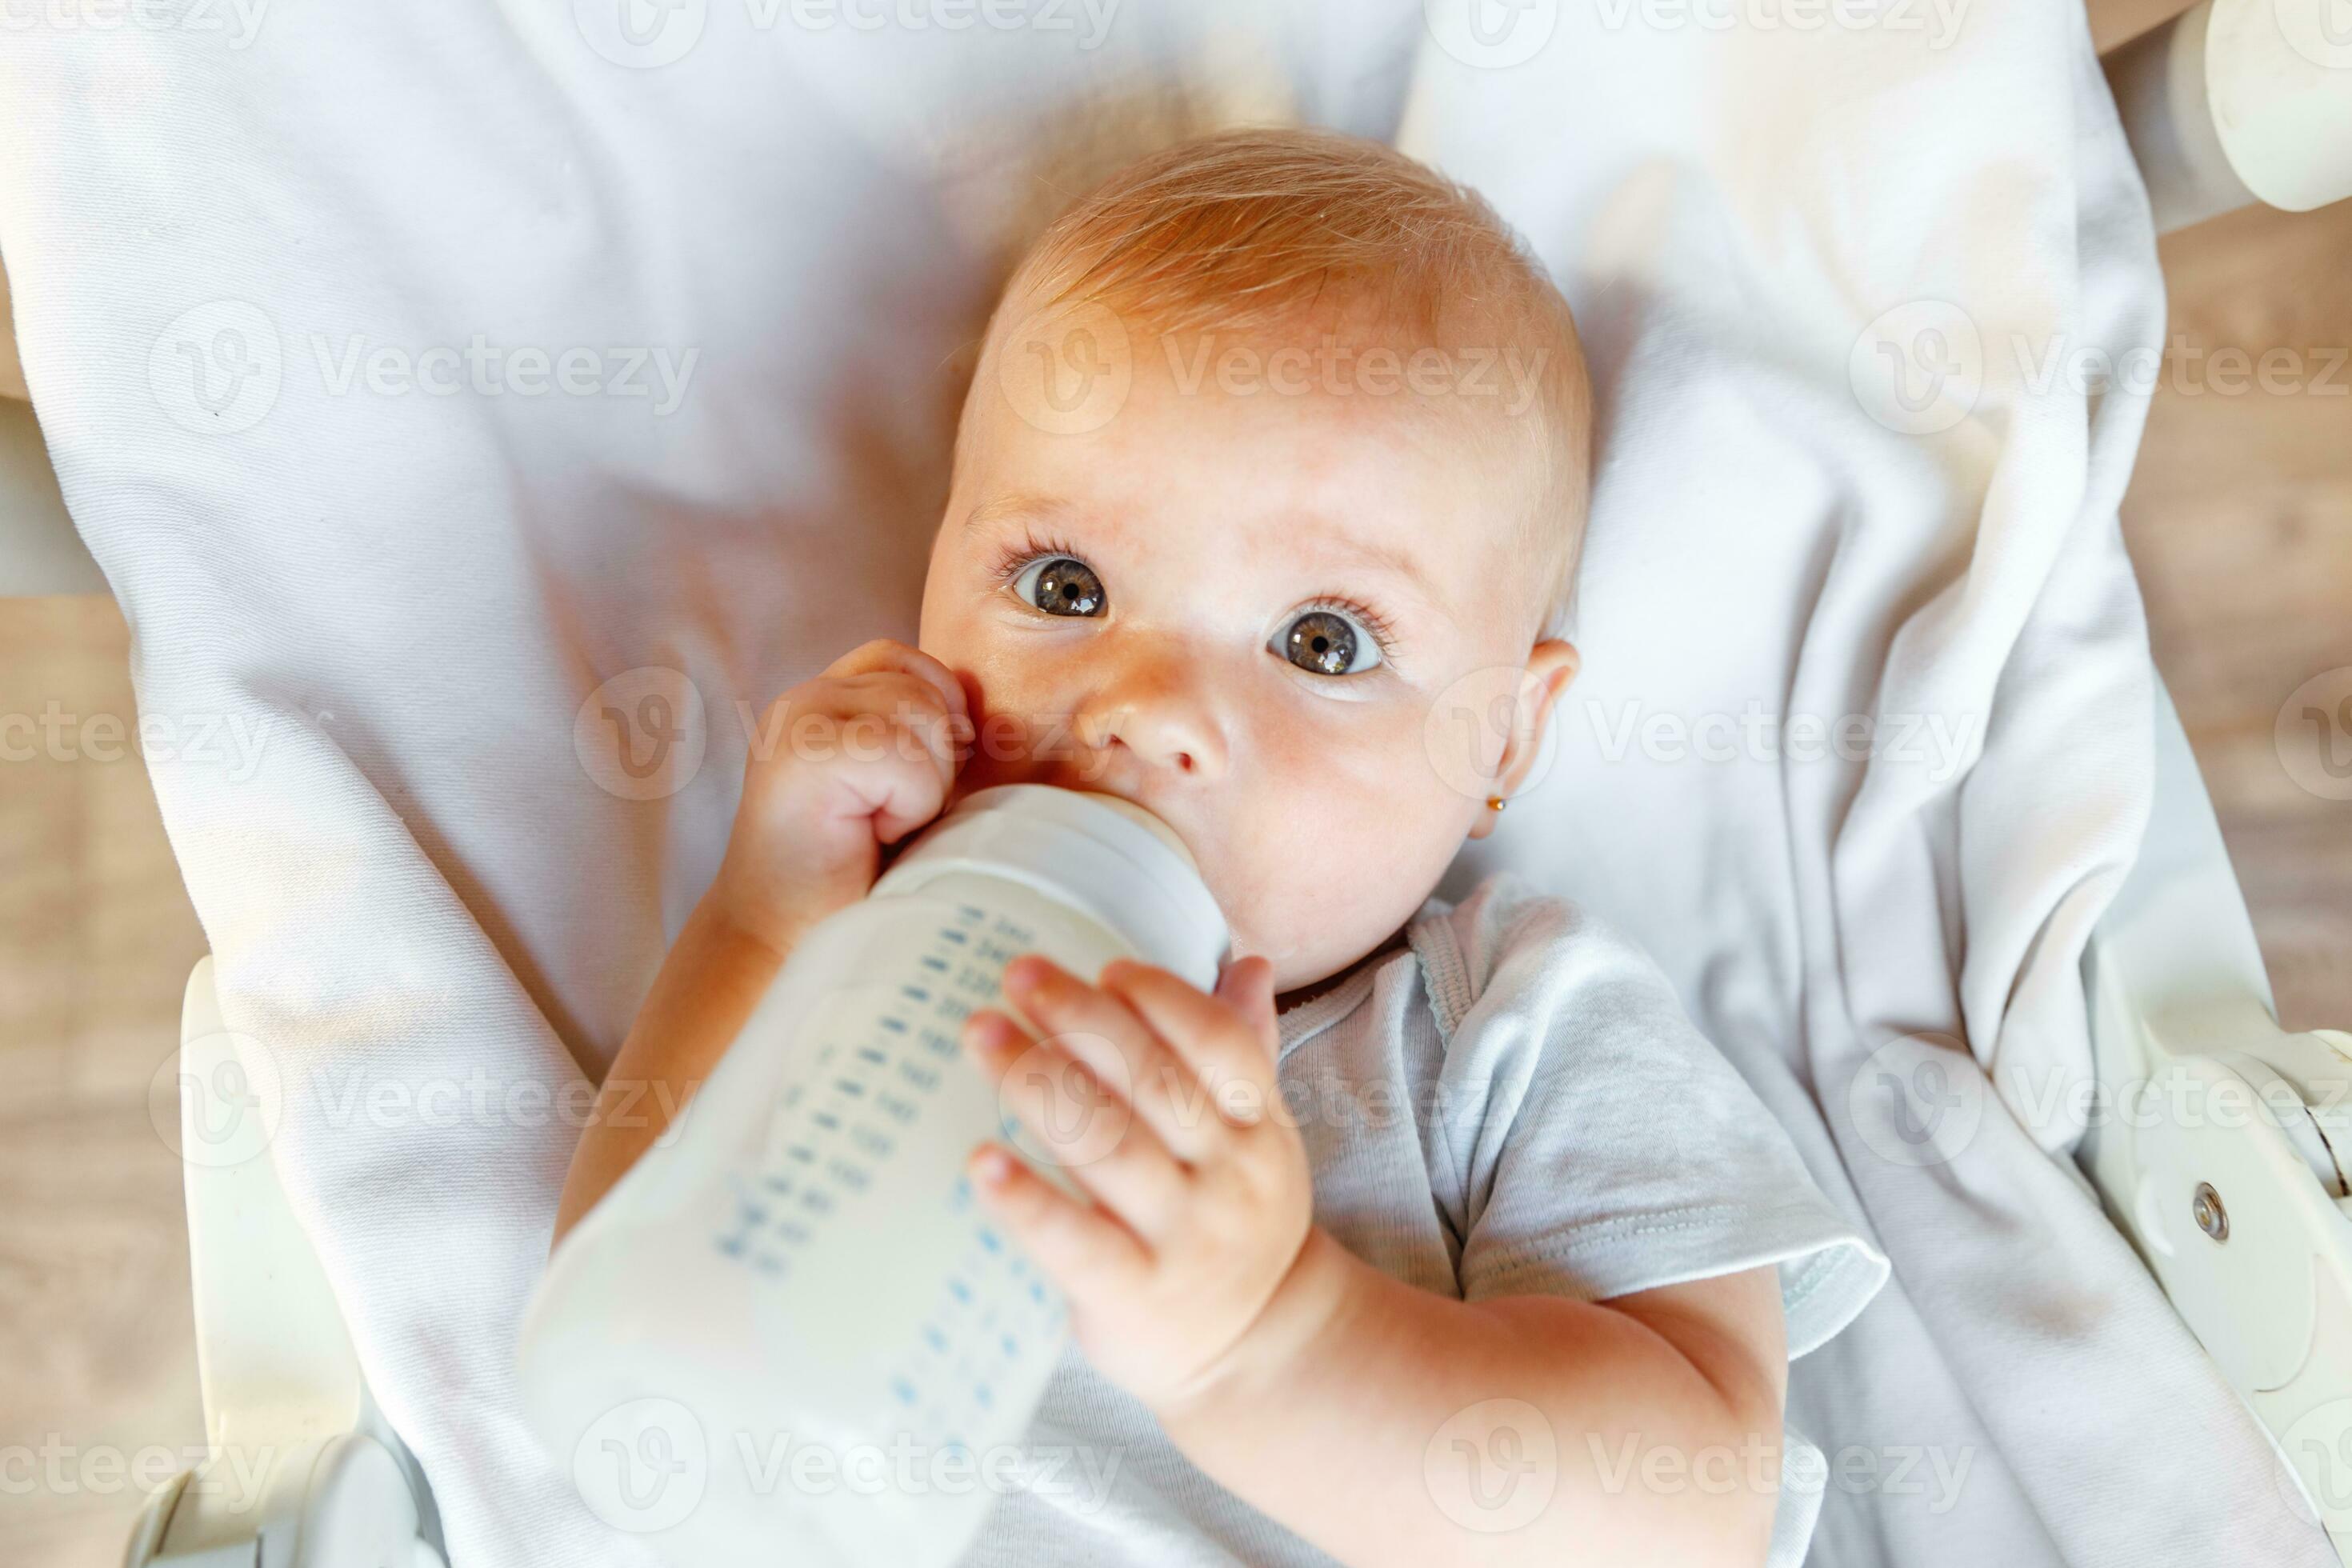 A two year old toddler drinking a bottle of baby milk, while sitting,  lying, on a settee playing on her iPad Stock Photo - Alamy